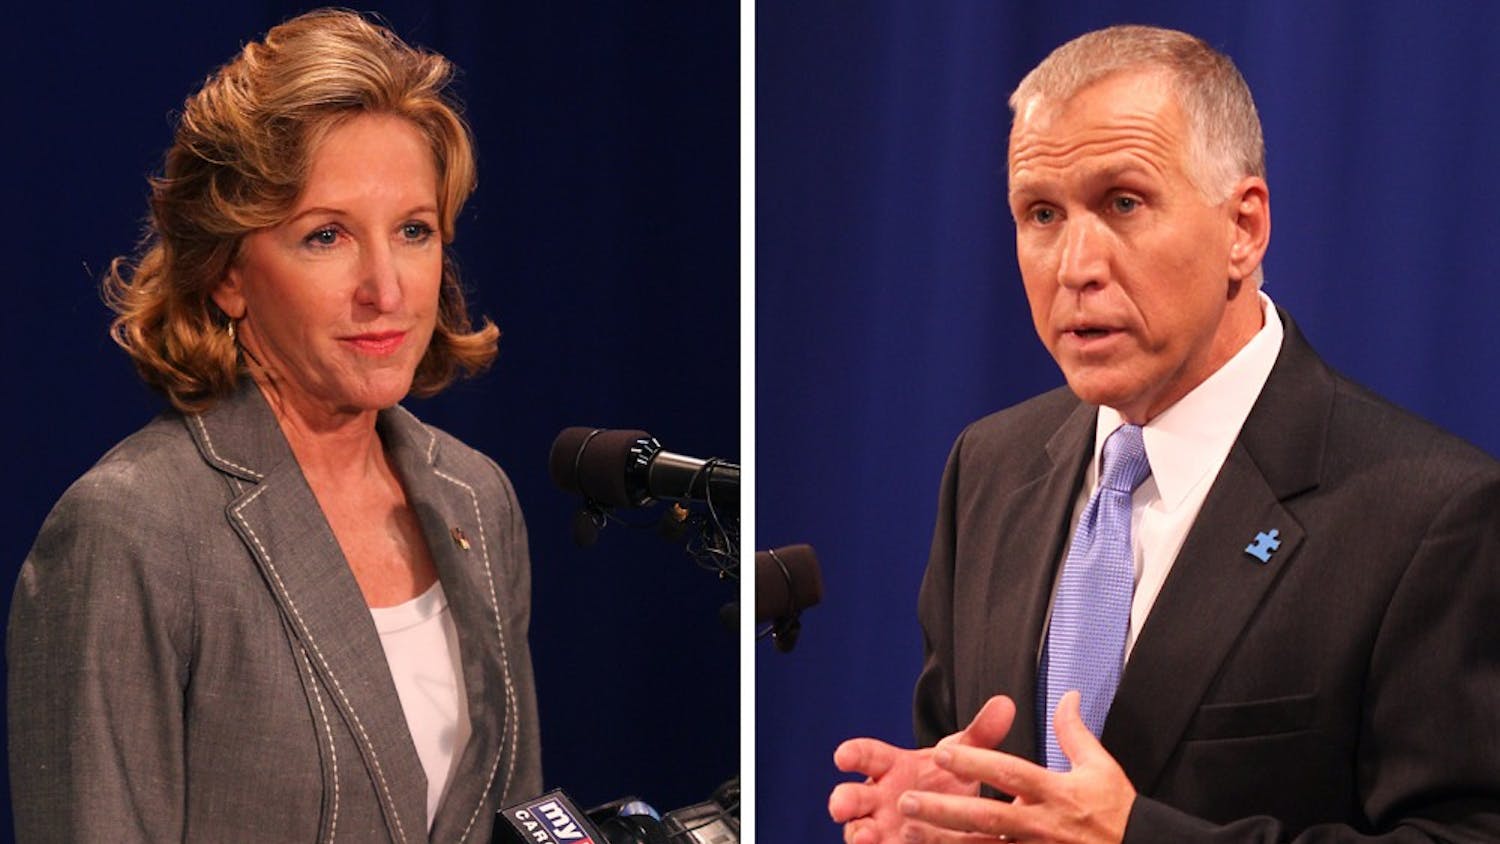 Sen. Kay Hagan, D-N.C.and Thom Tillis had their first debate for the race for U.S. Senate on Wednesday.